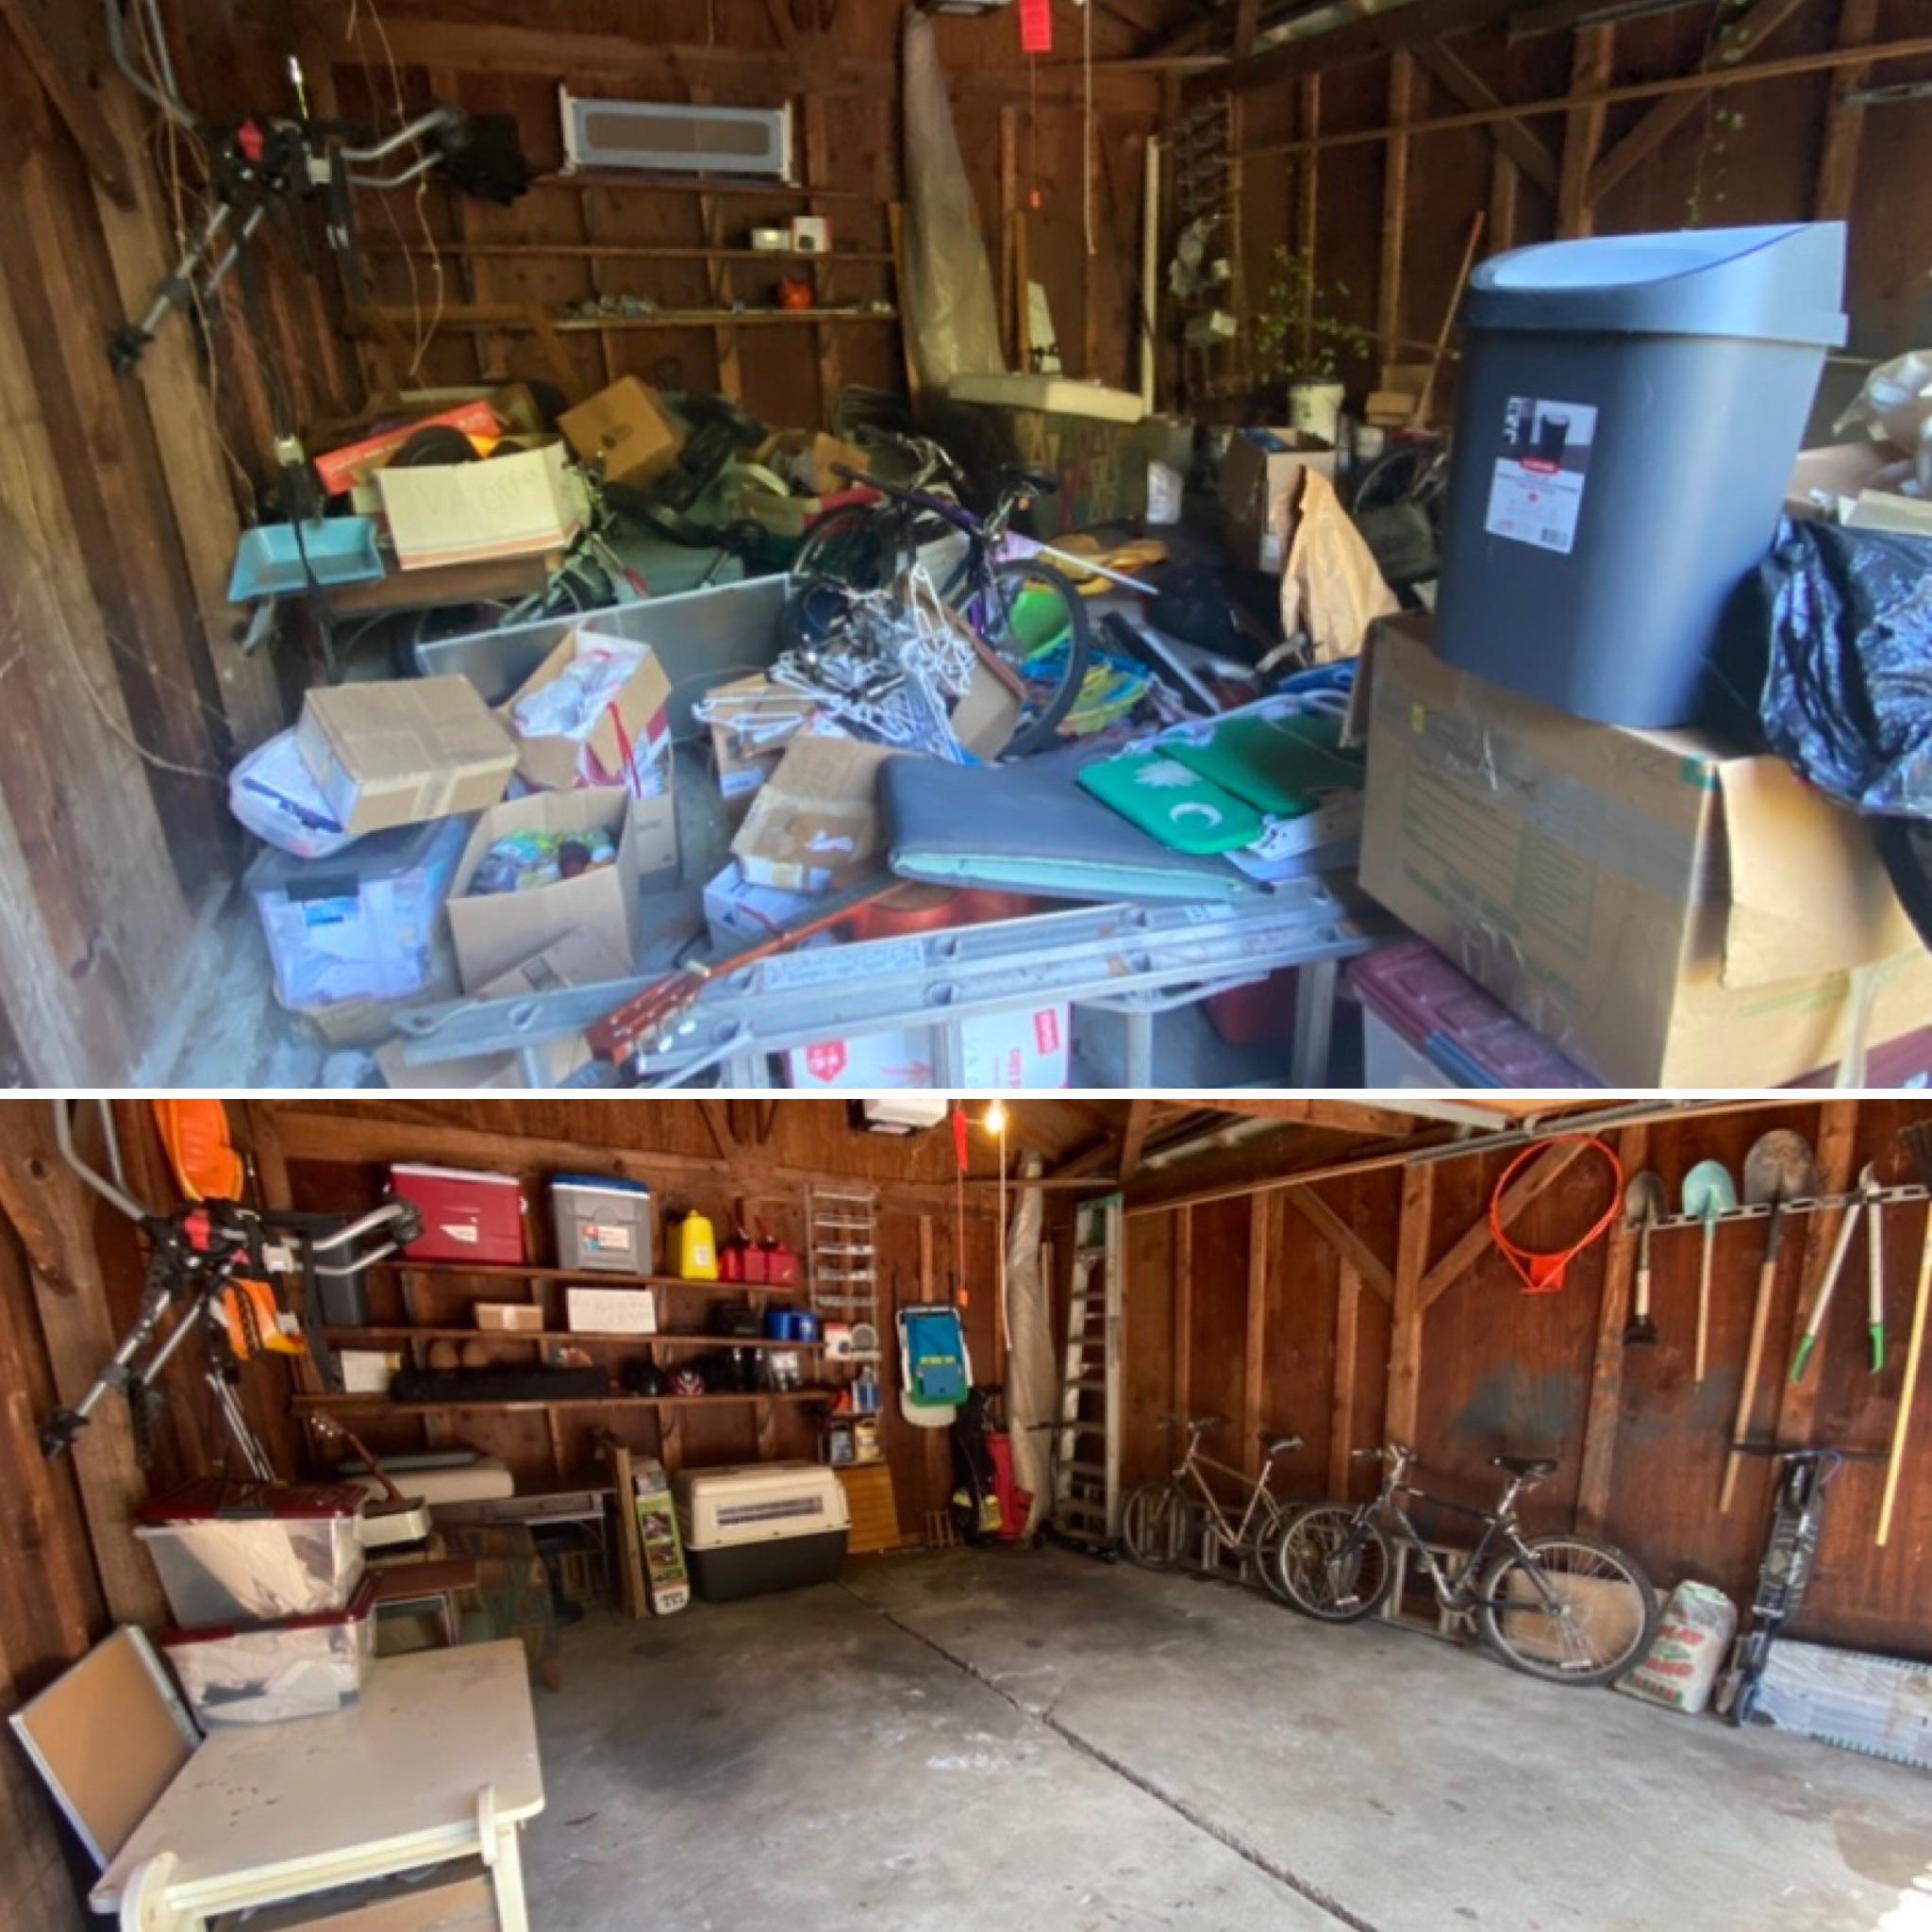 dirty and cluttered garage that has been tidied up.